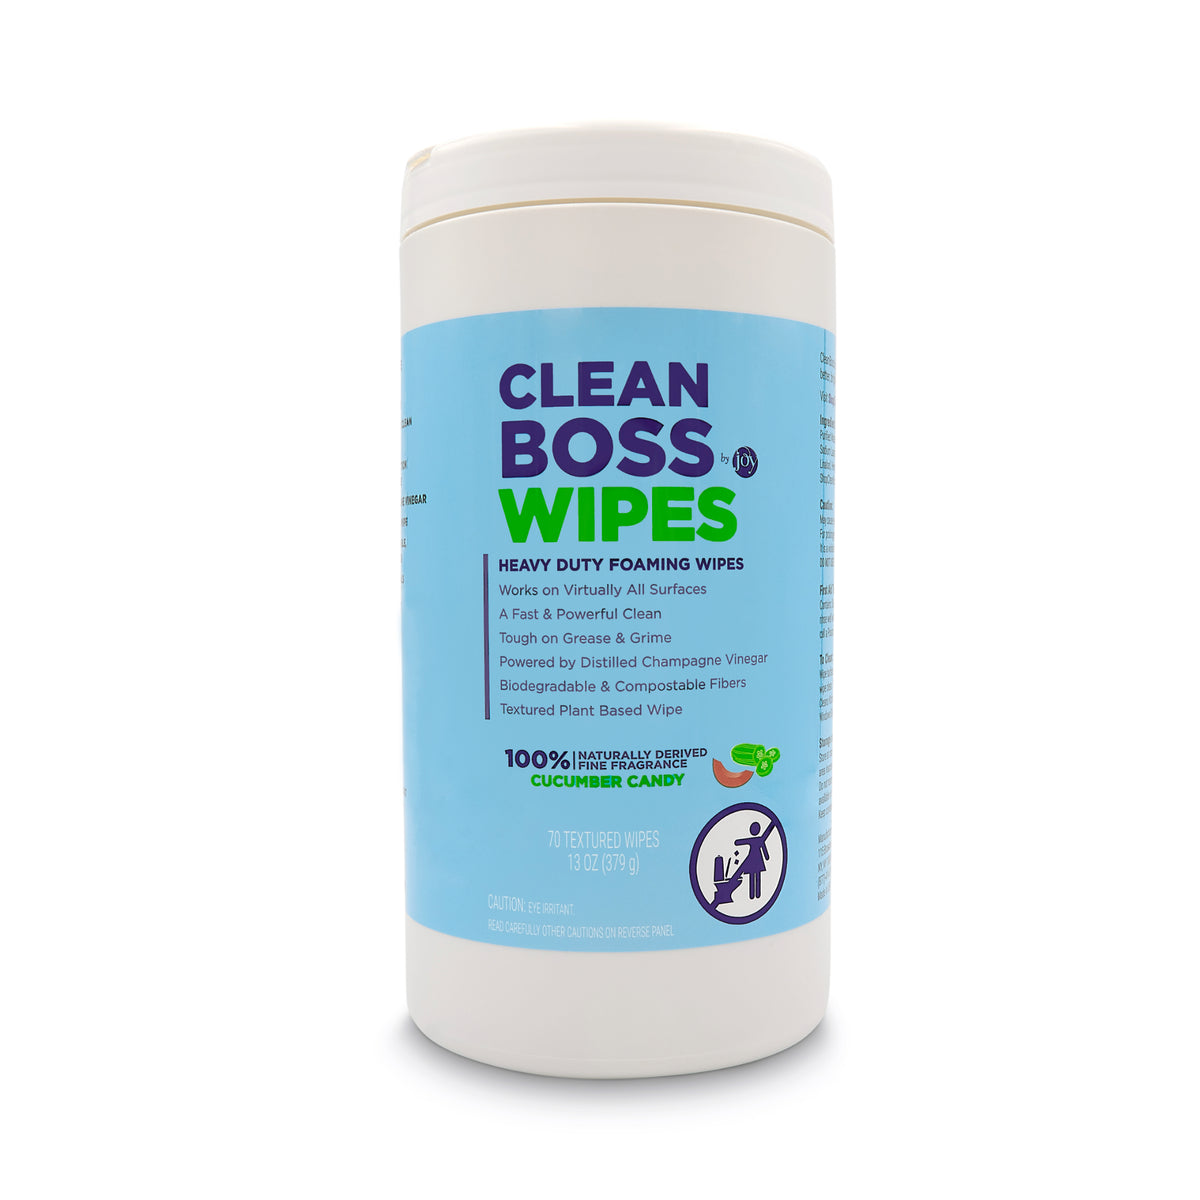 Grime Boss Hand & Surface Wipes, 30 Wipes/Pack